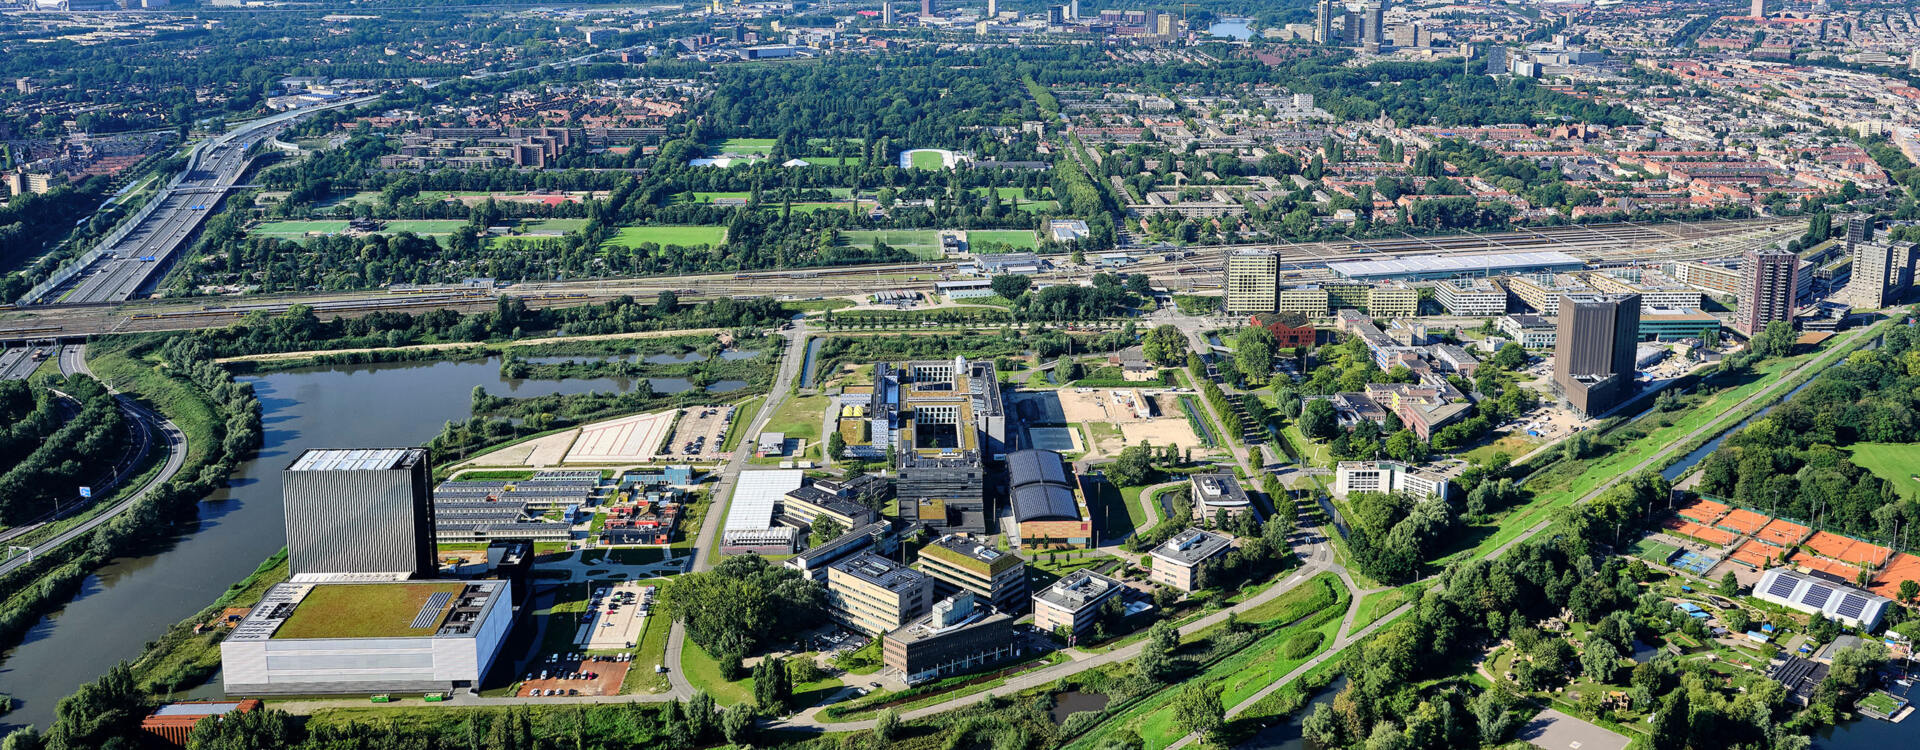 Luchtfoto Amsterdam Science Park 2020